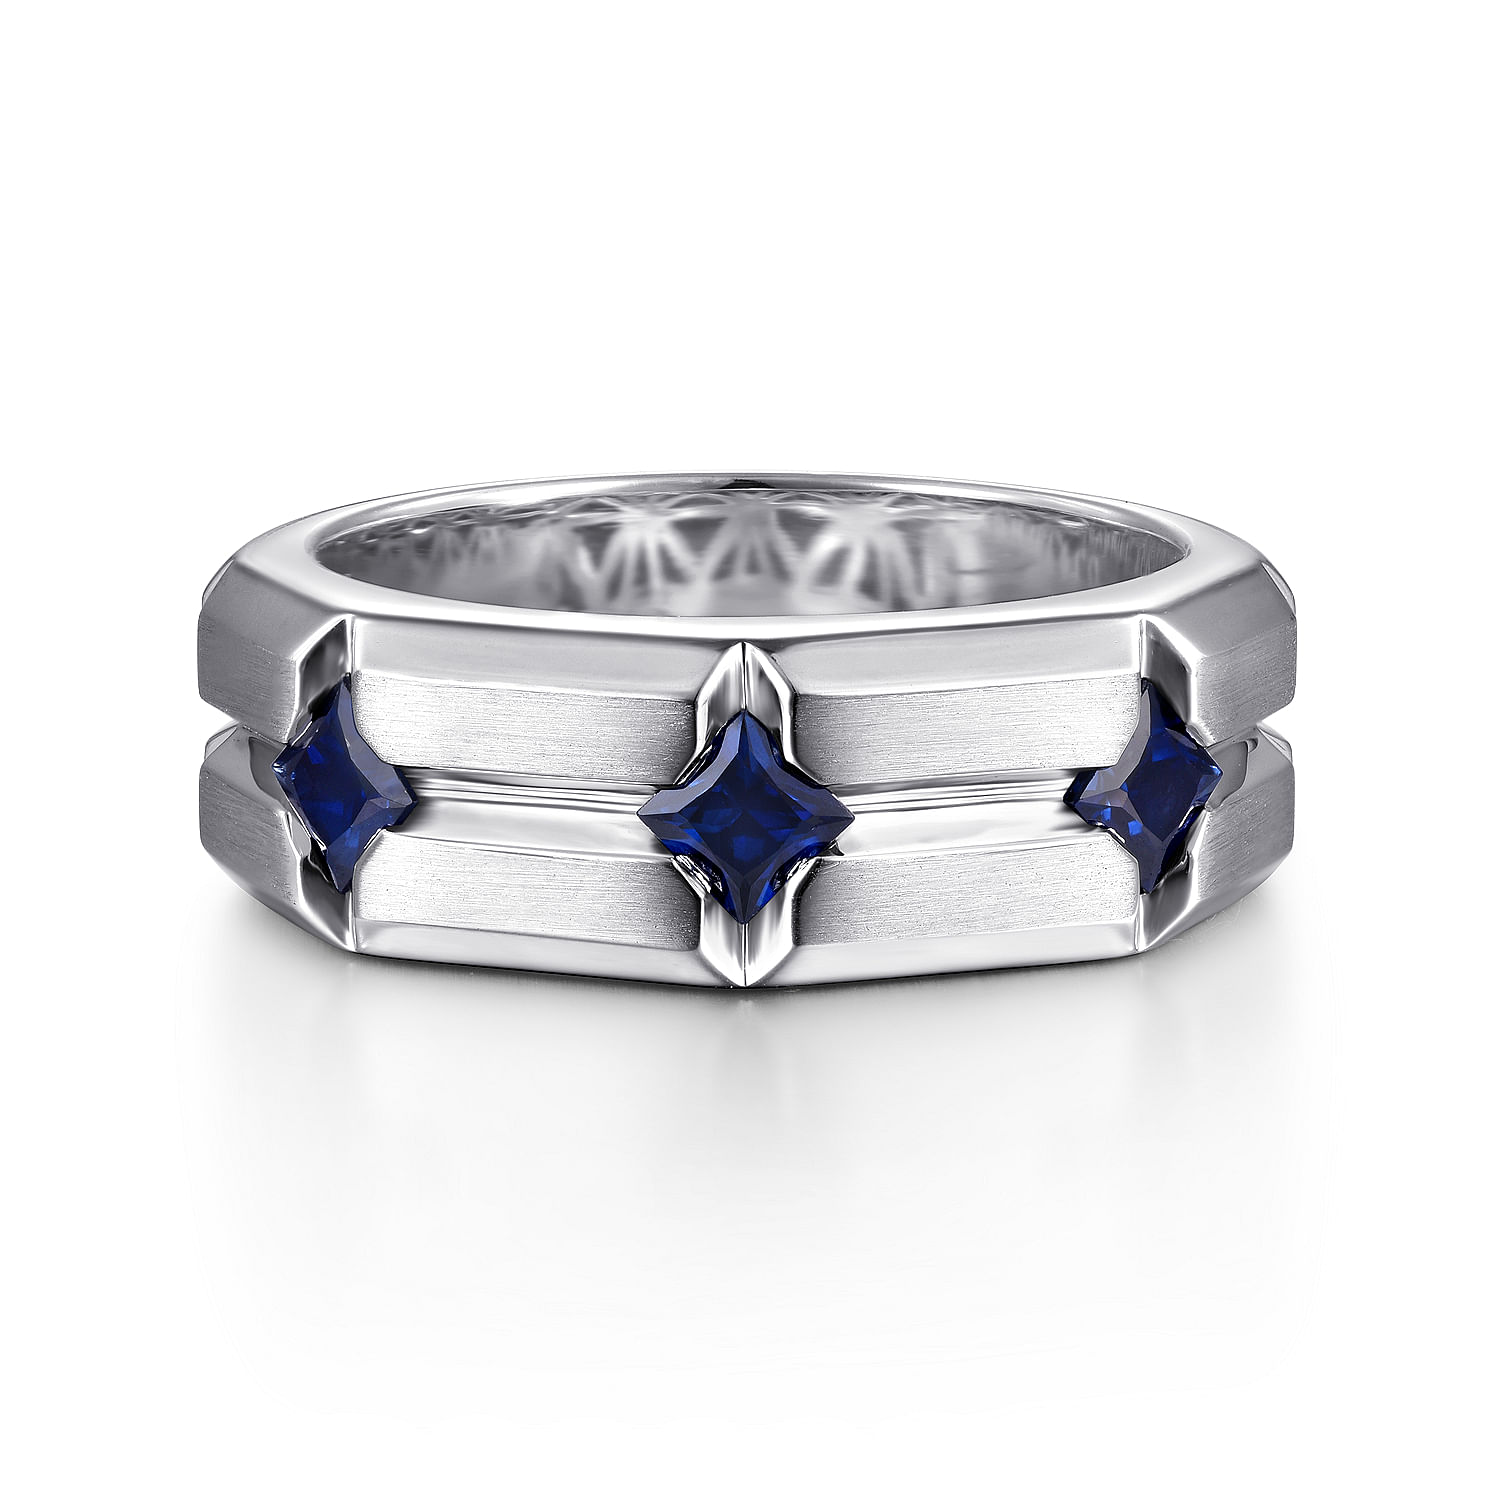 14K White Gold Ring with Square Sapphire Stations